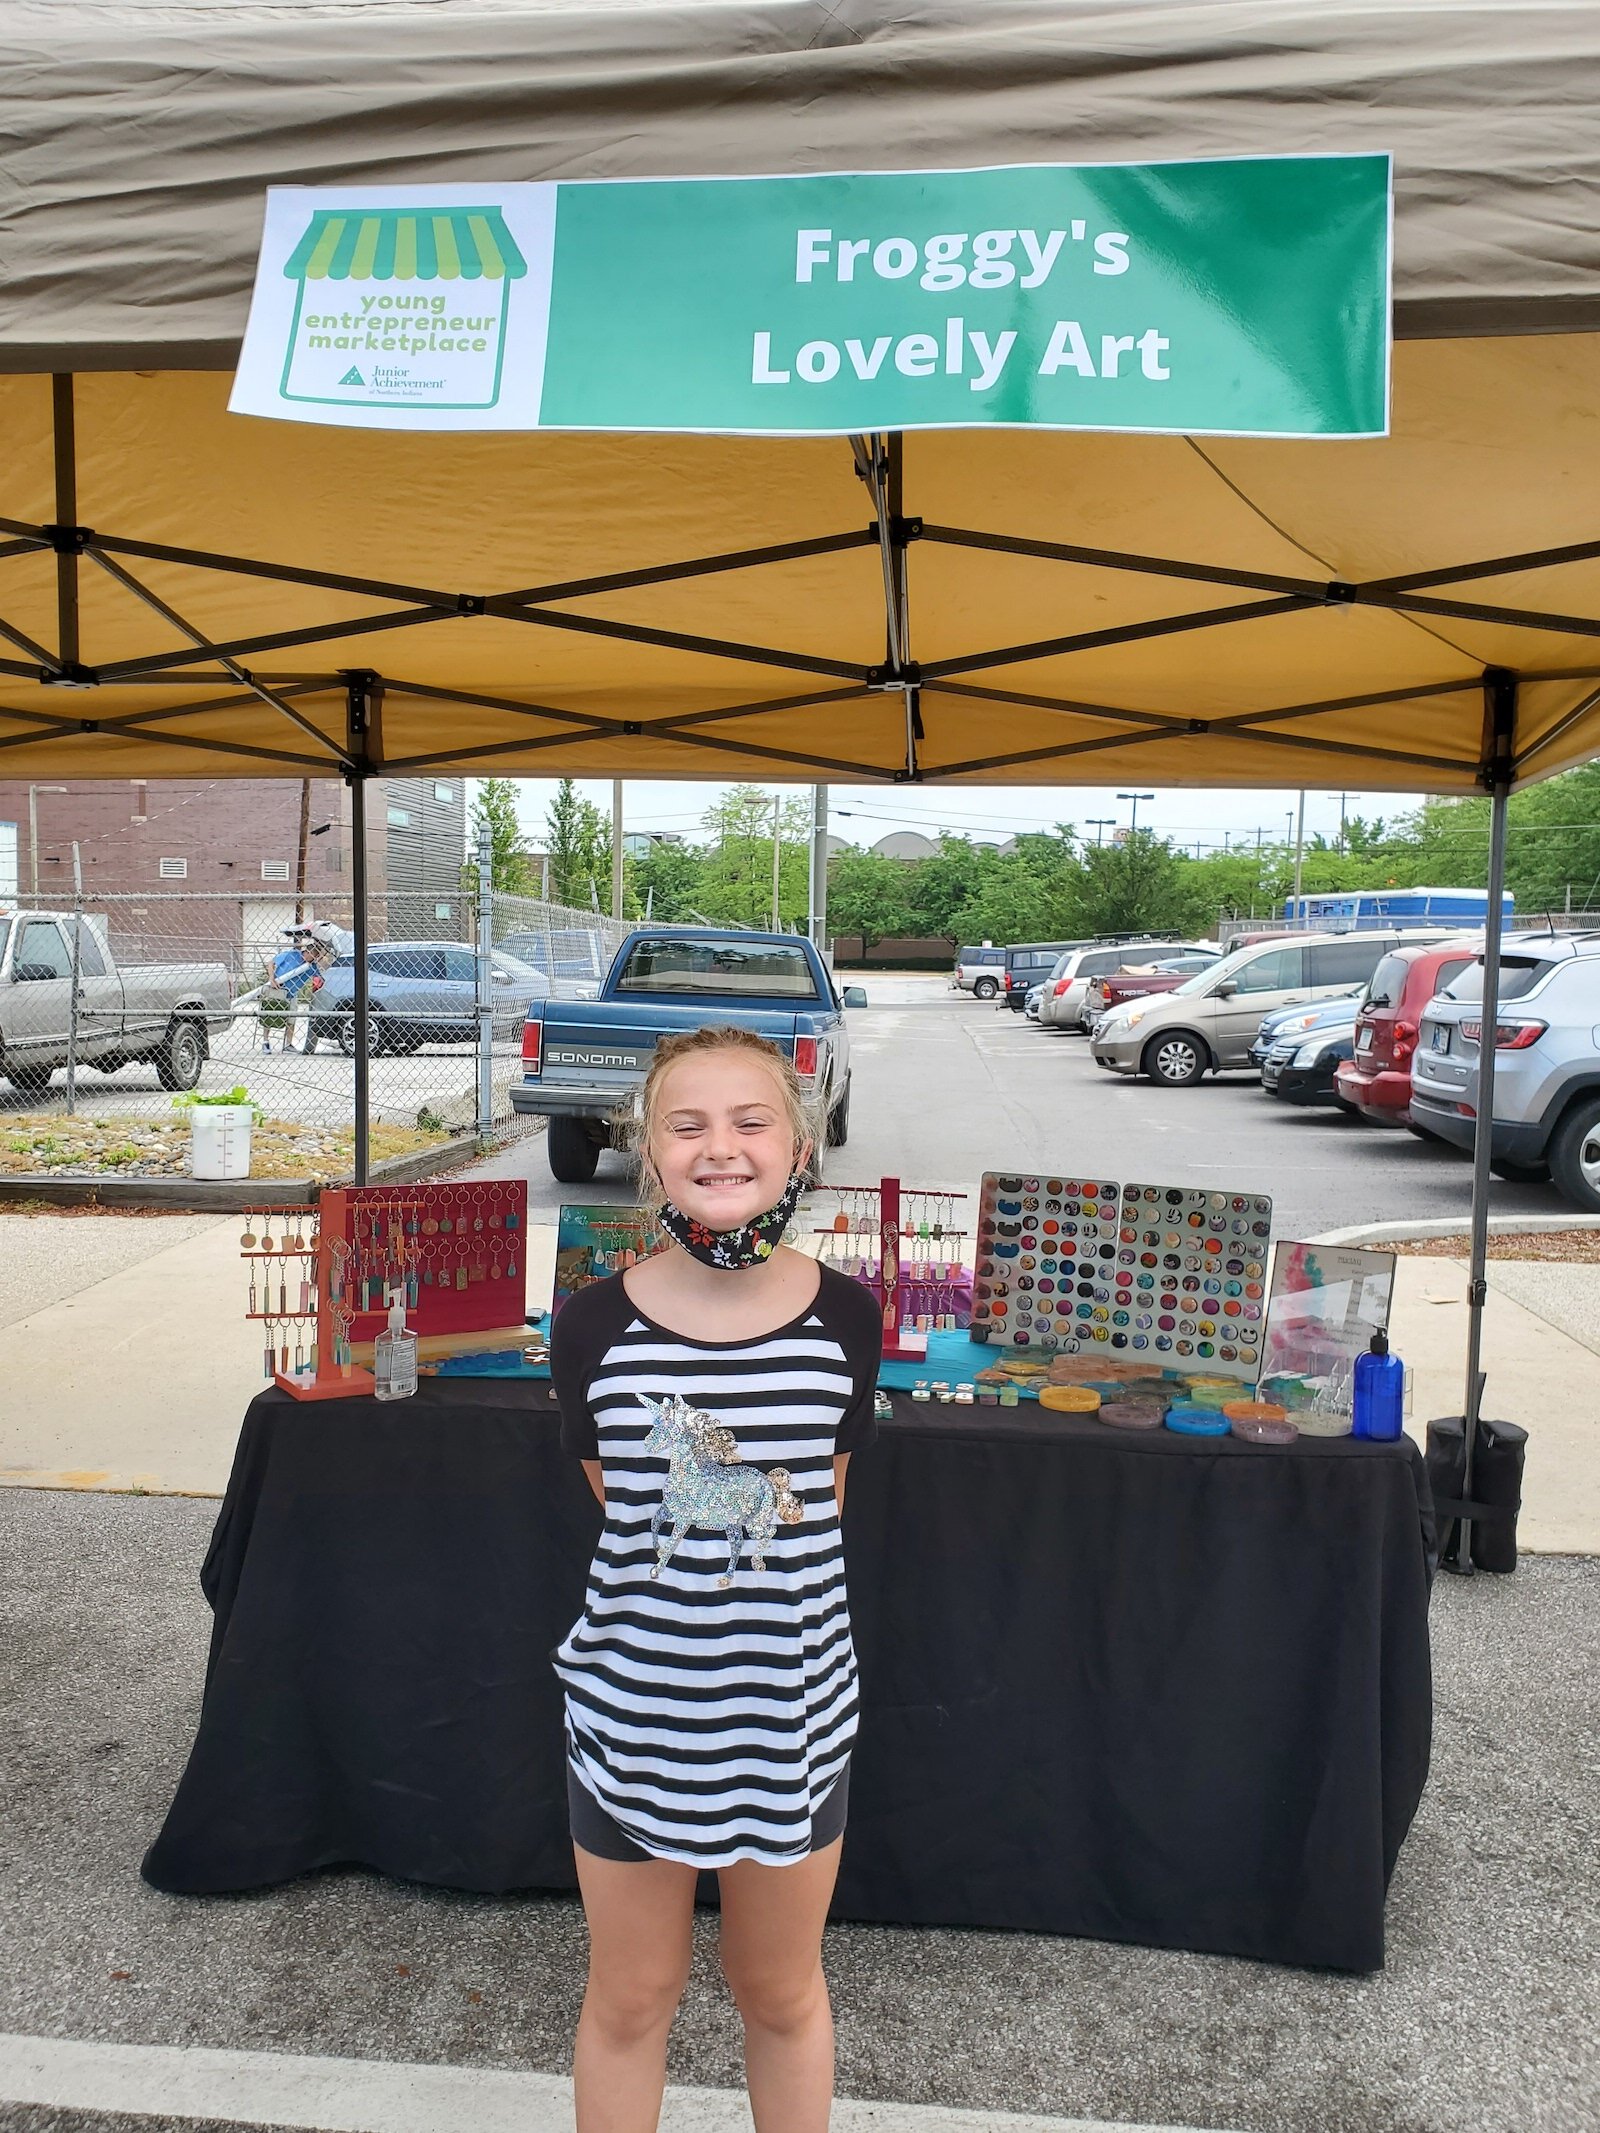 Lilly Hinds, age 10, runs Froggy's Lovely Art, a business that sells custom crafts, like coaster, keychains, and magnets.